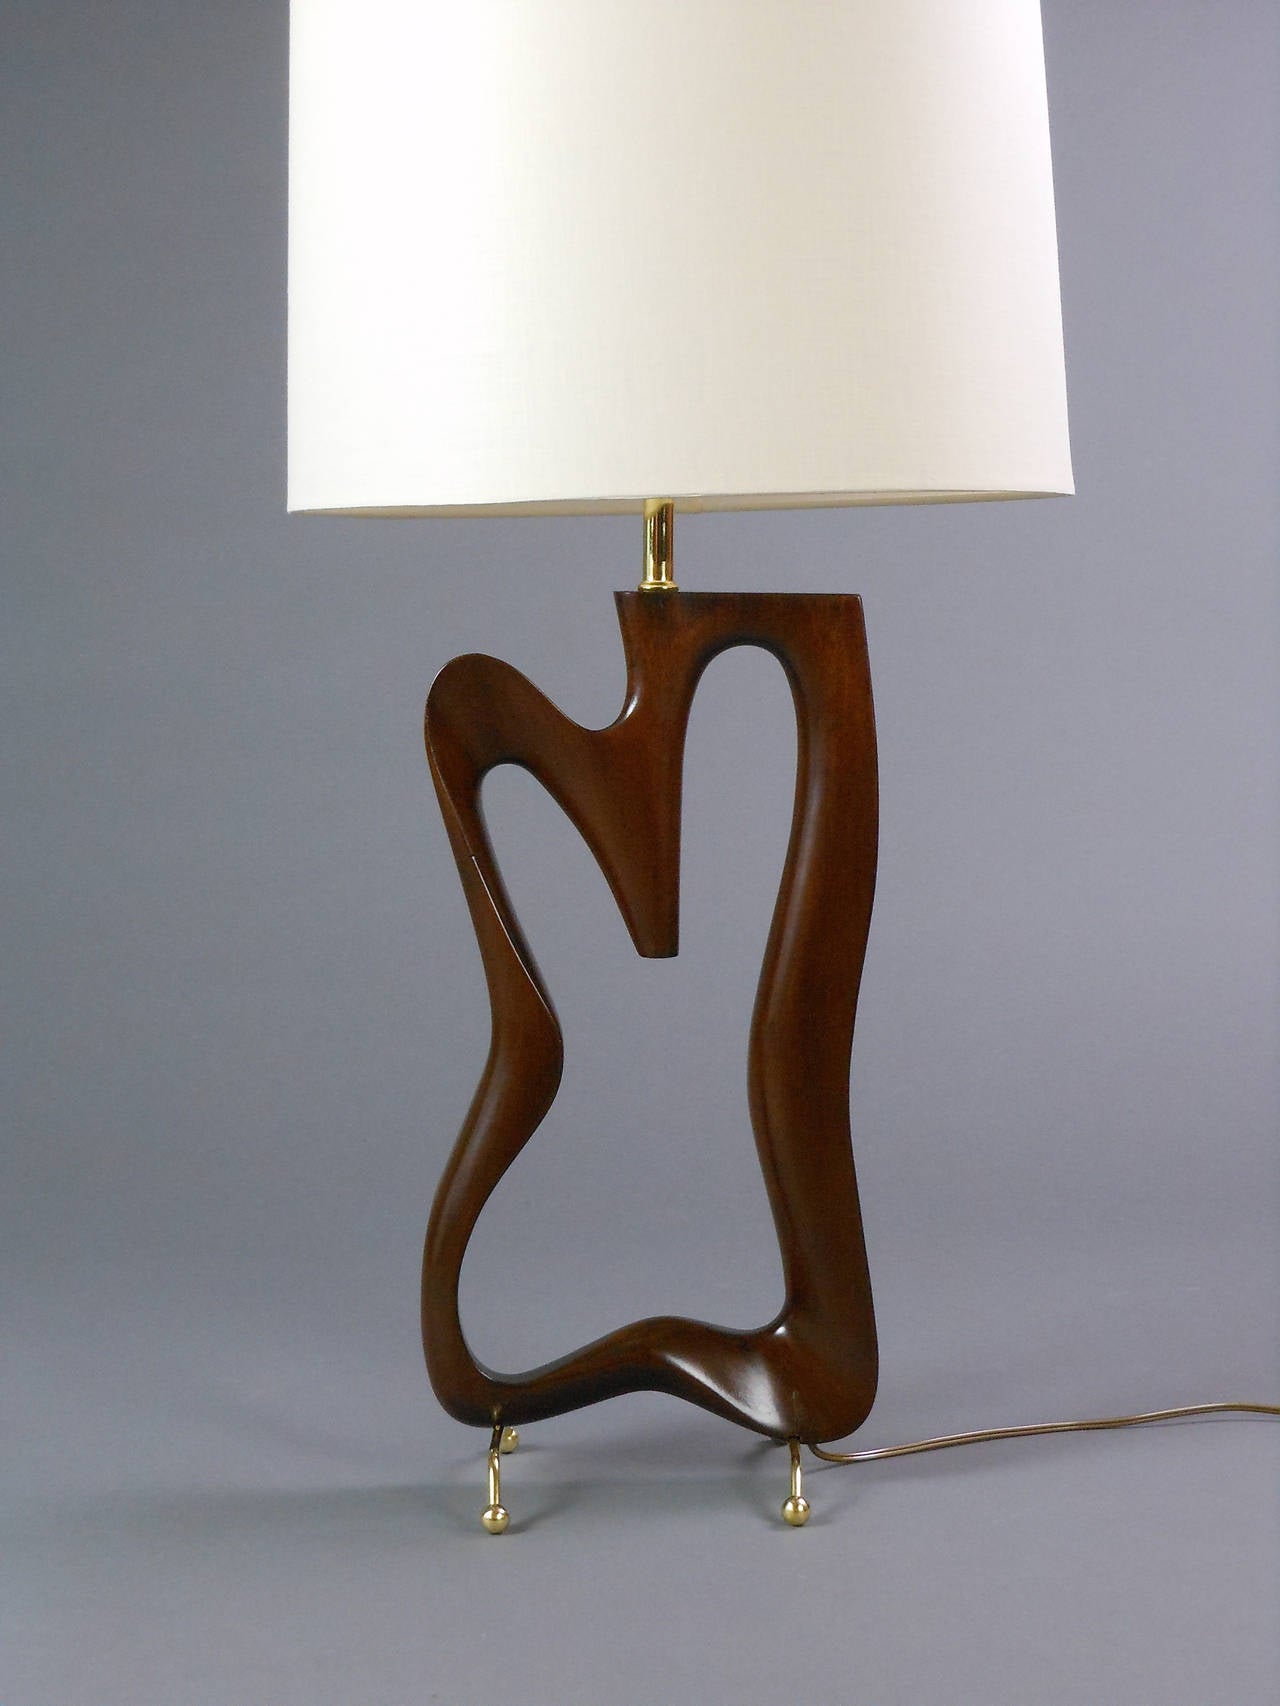 The open form rests on rod and ball feet.

Height to light fitting: 20"
Height to top of shade: 32".